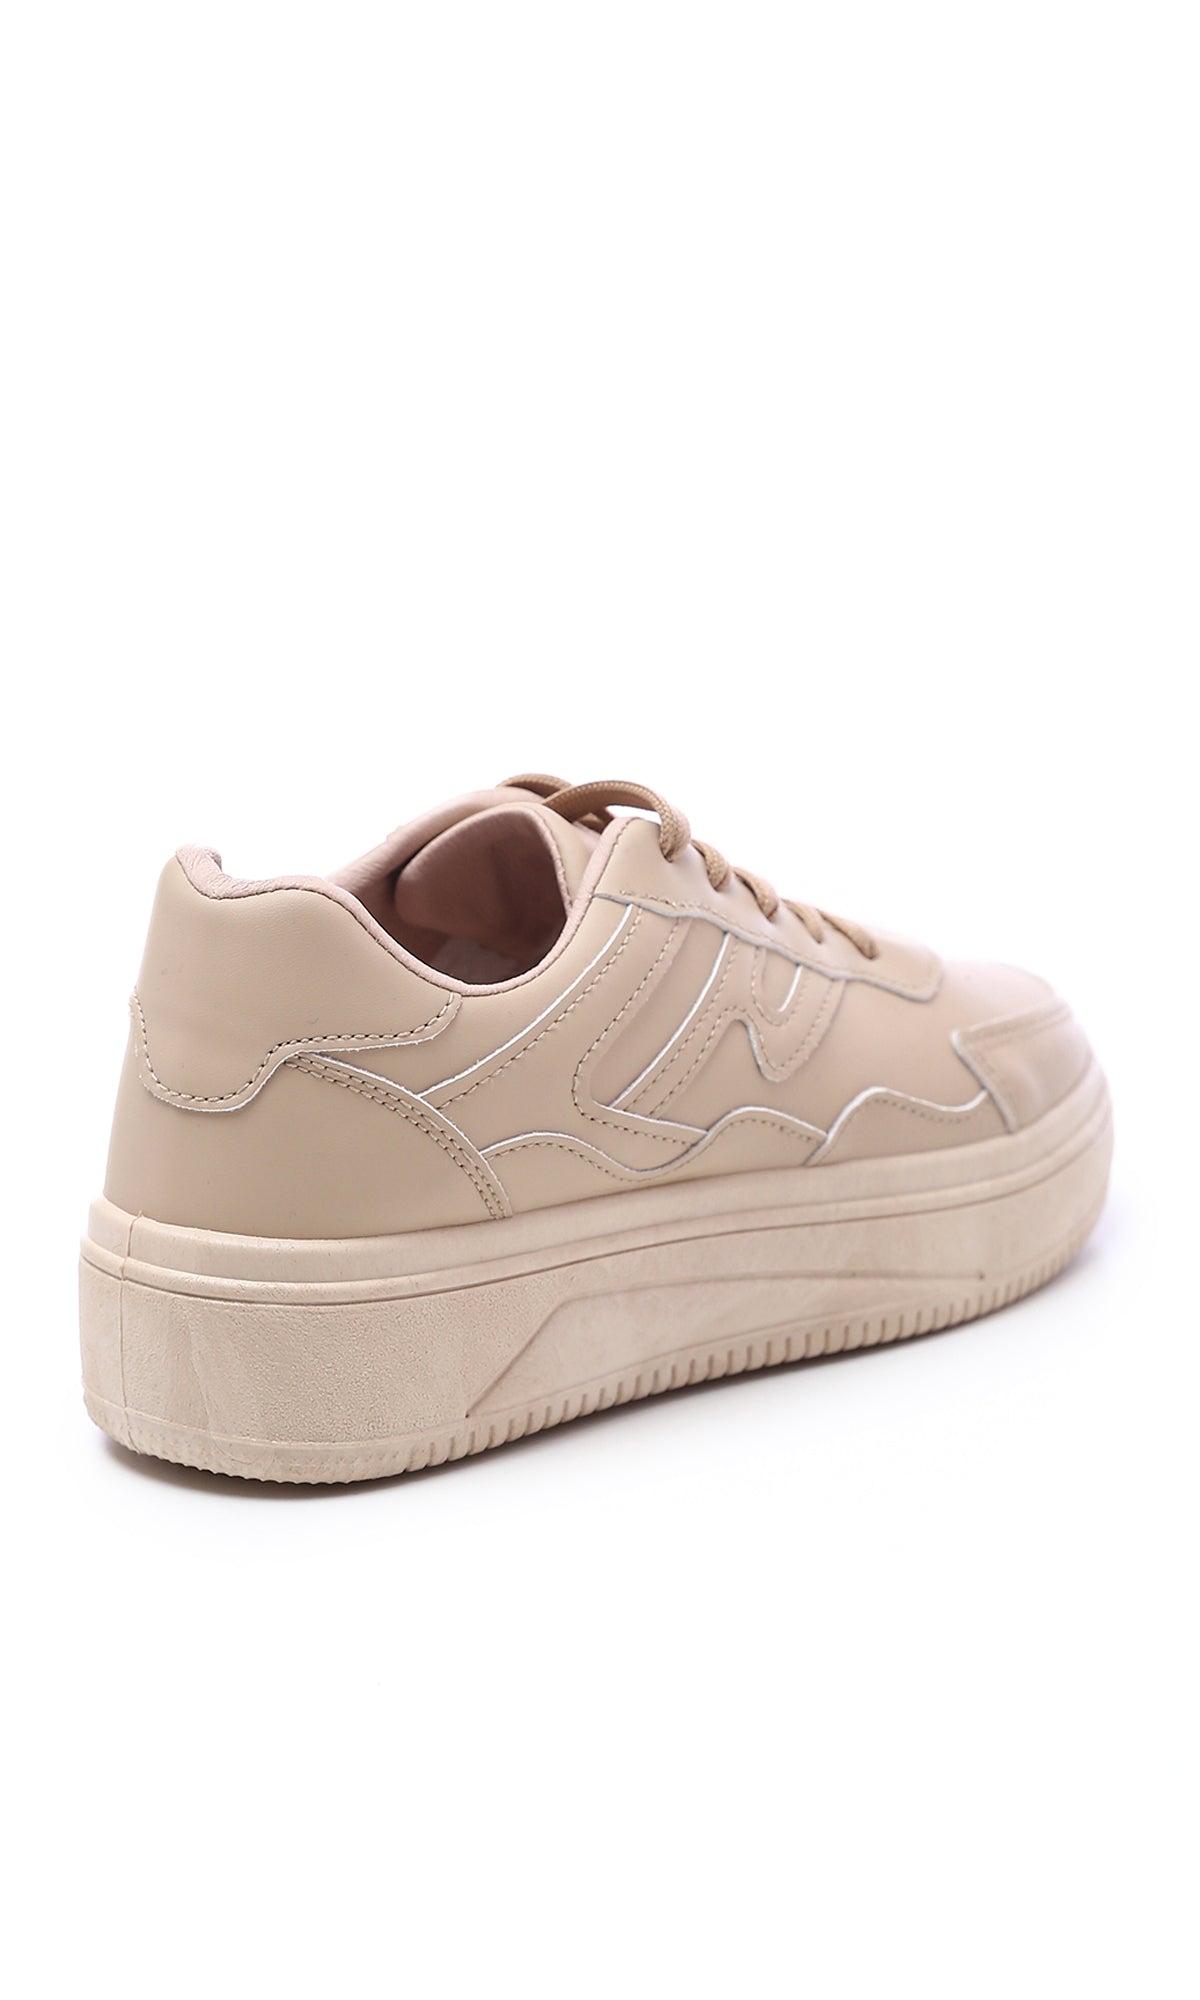 O177892 High-Sole Lace Up Casual Sneakers - Dark Beige